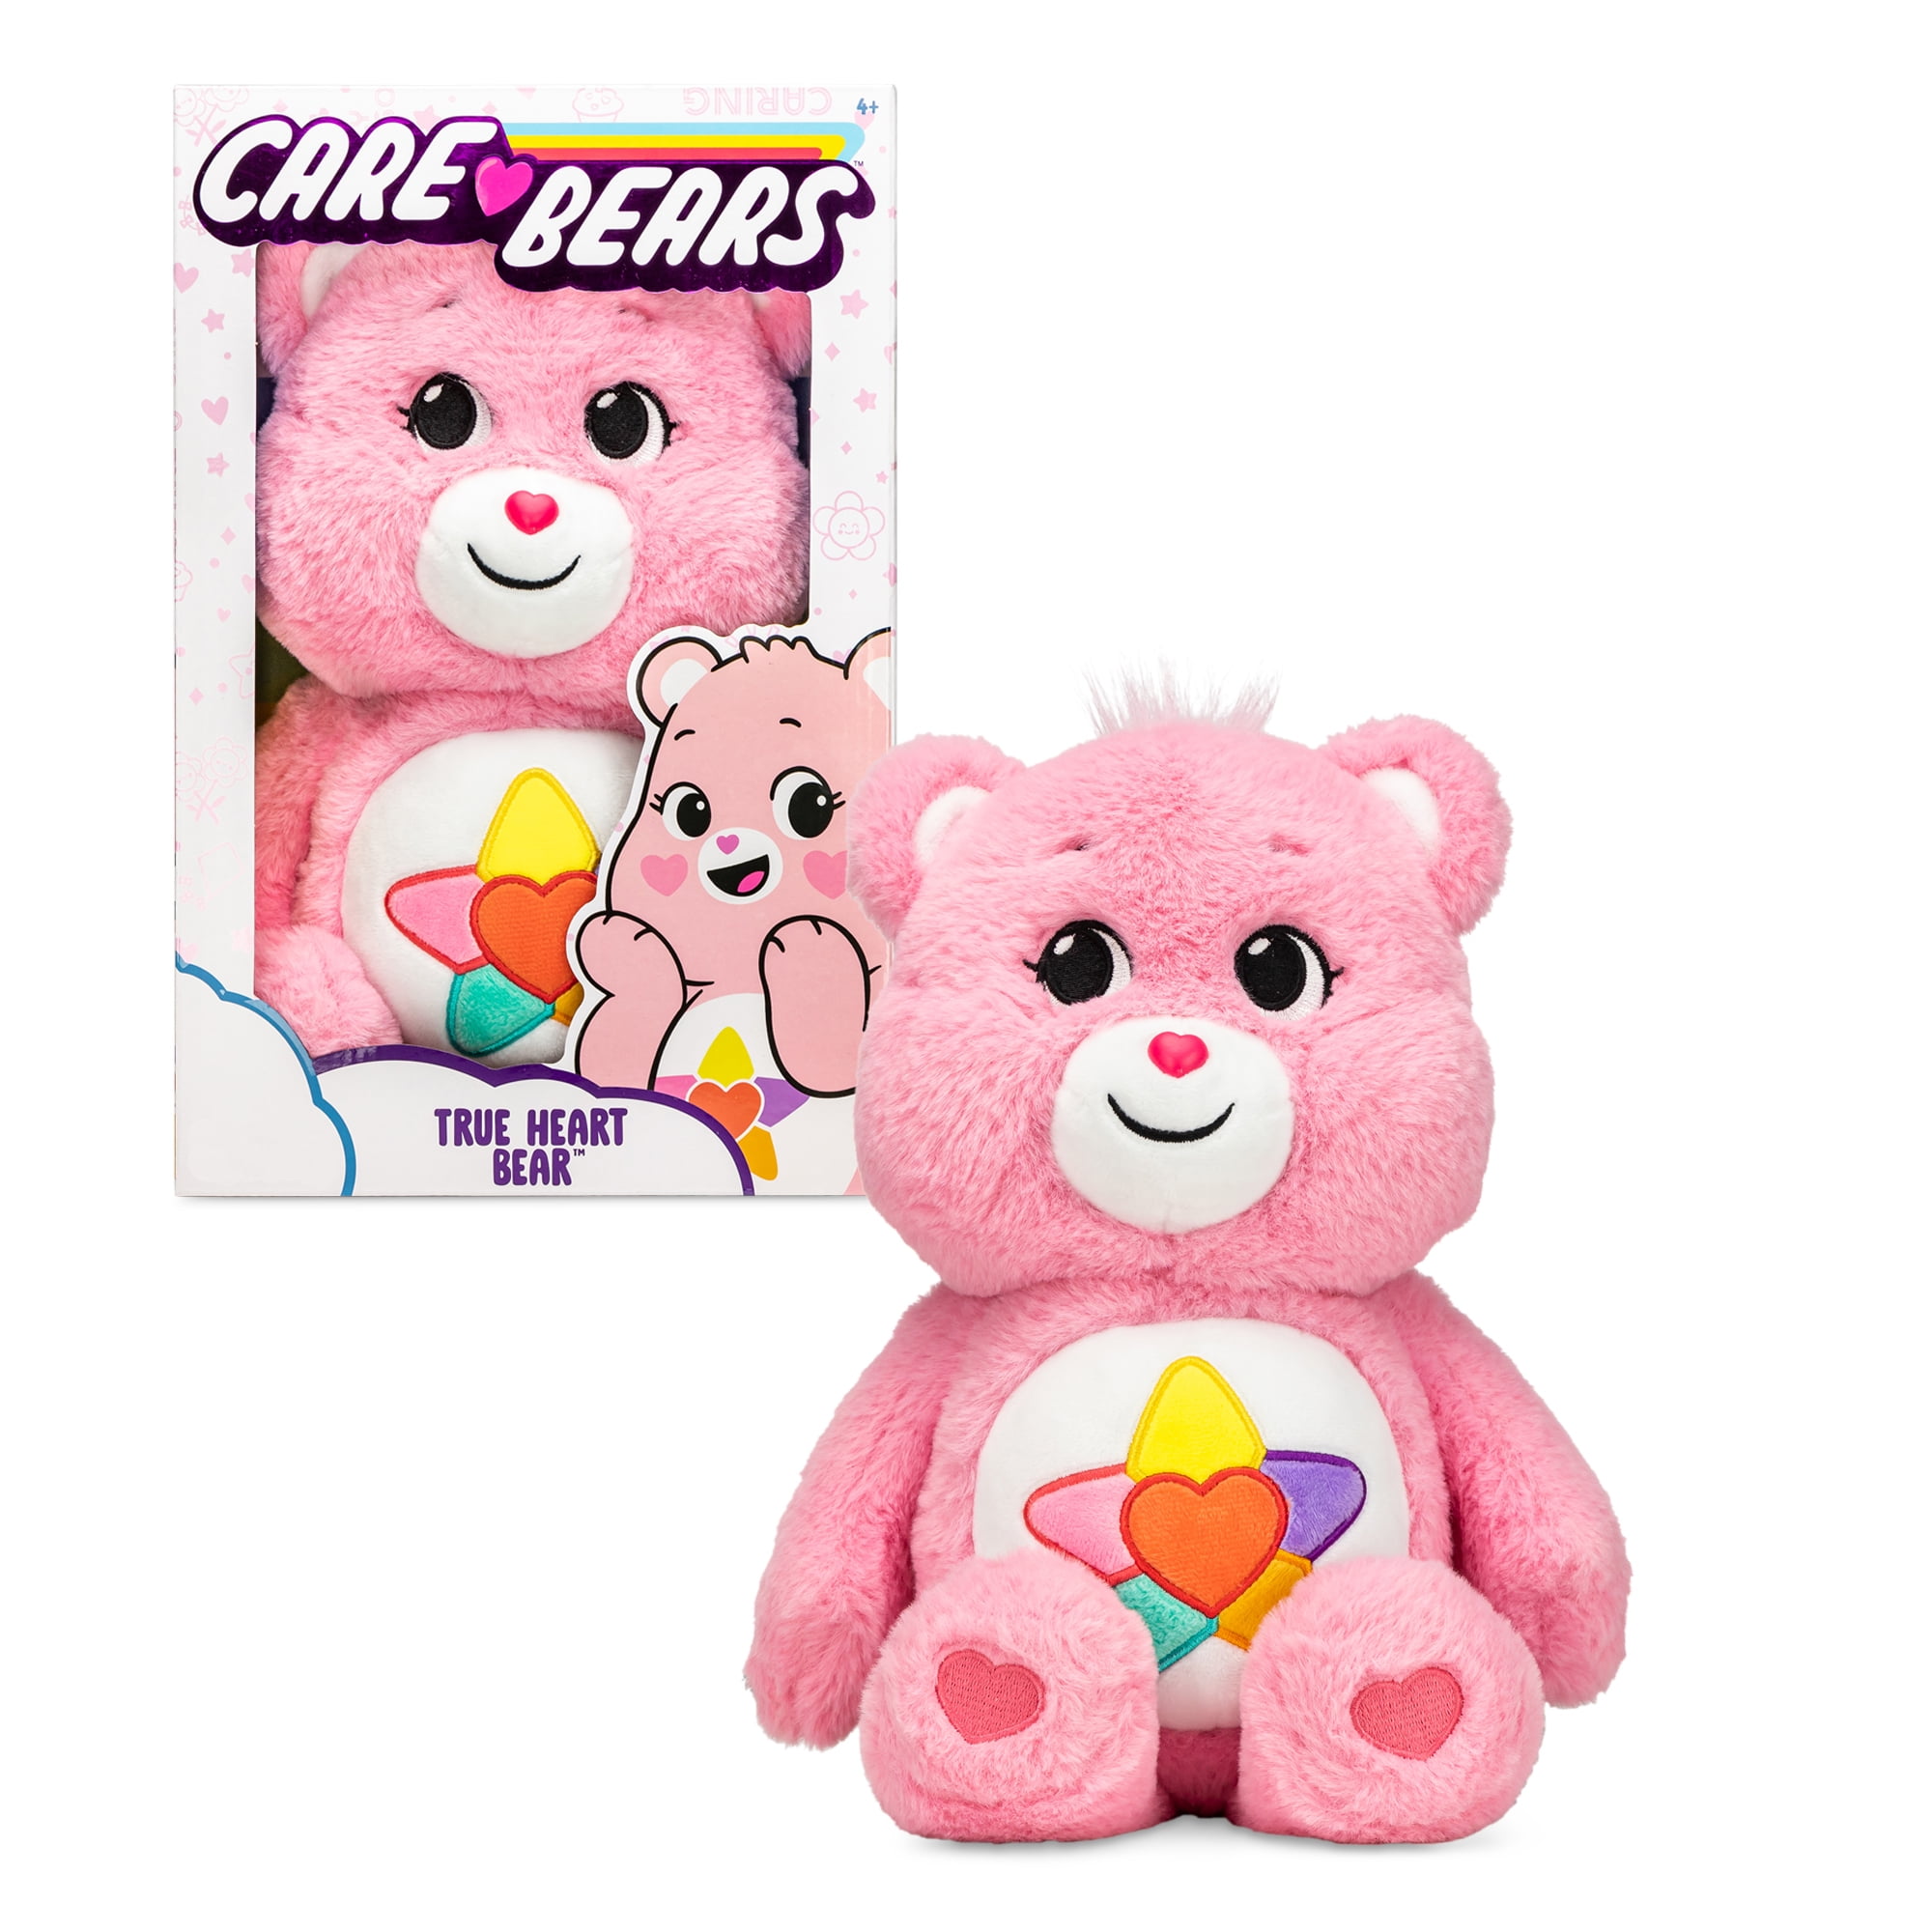 TEDDY BRAND NEW SOFT TOY SHARE CARE BEAR BAG / KEY CLIP 6 INCHES, 15CM 